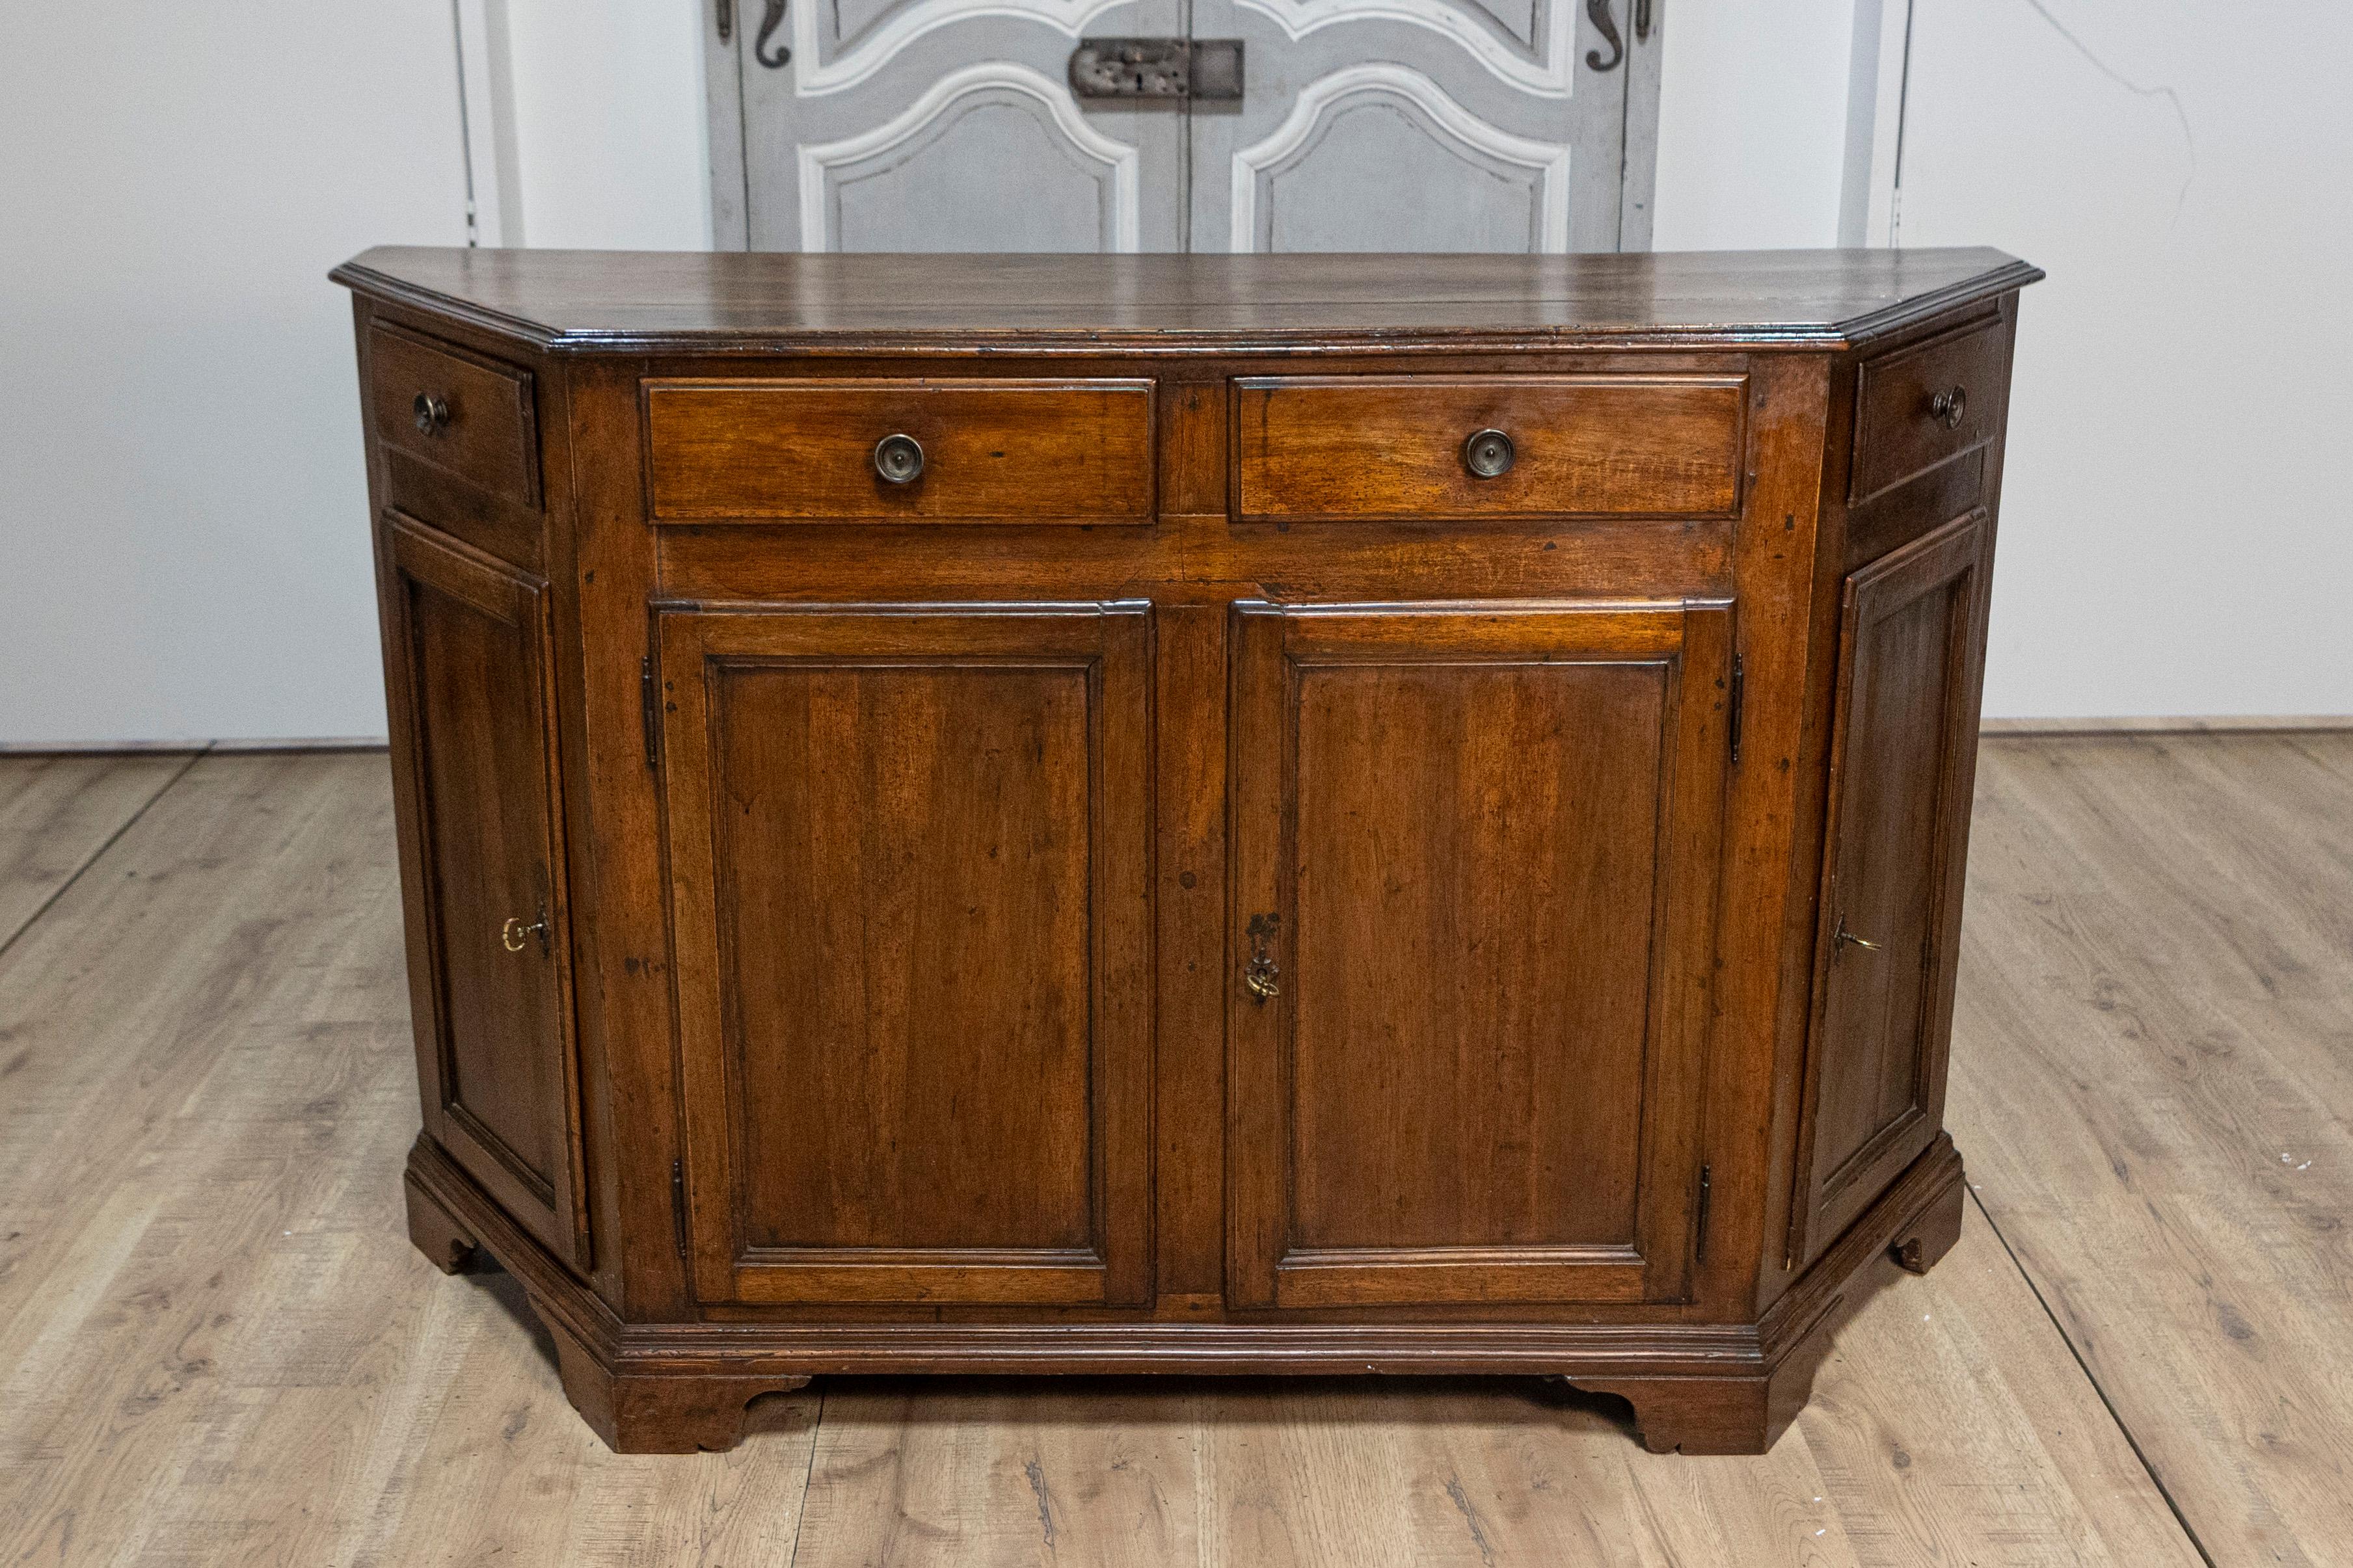 An Italian 19th century walnut credenza from Venice, with canted sides and four drawers over four doors. This exquisite Venetian walnut credenza from the 19th century is a testament to classic craftsmanship and timeless elegance. With its rich